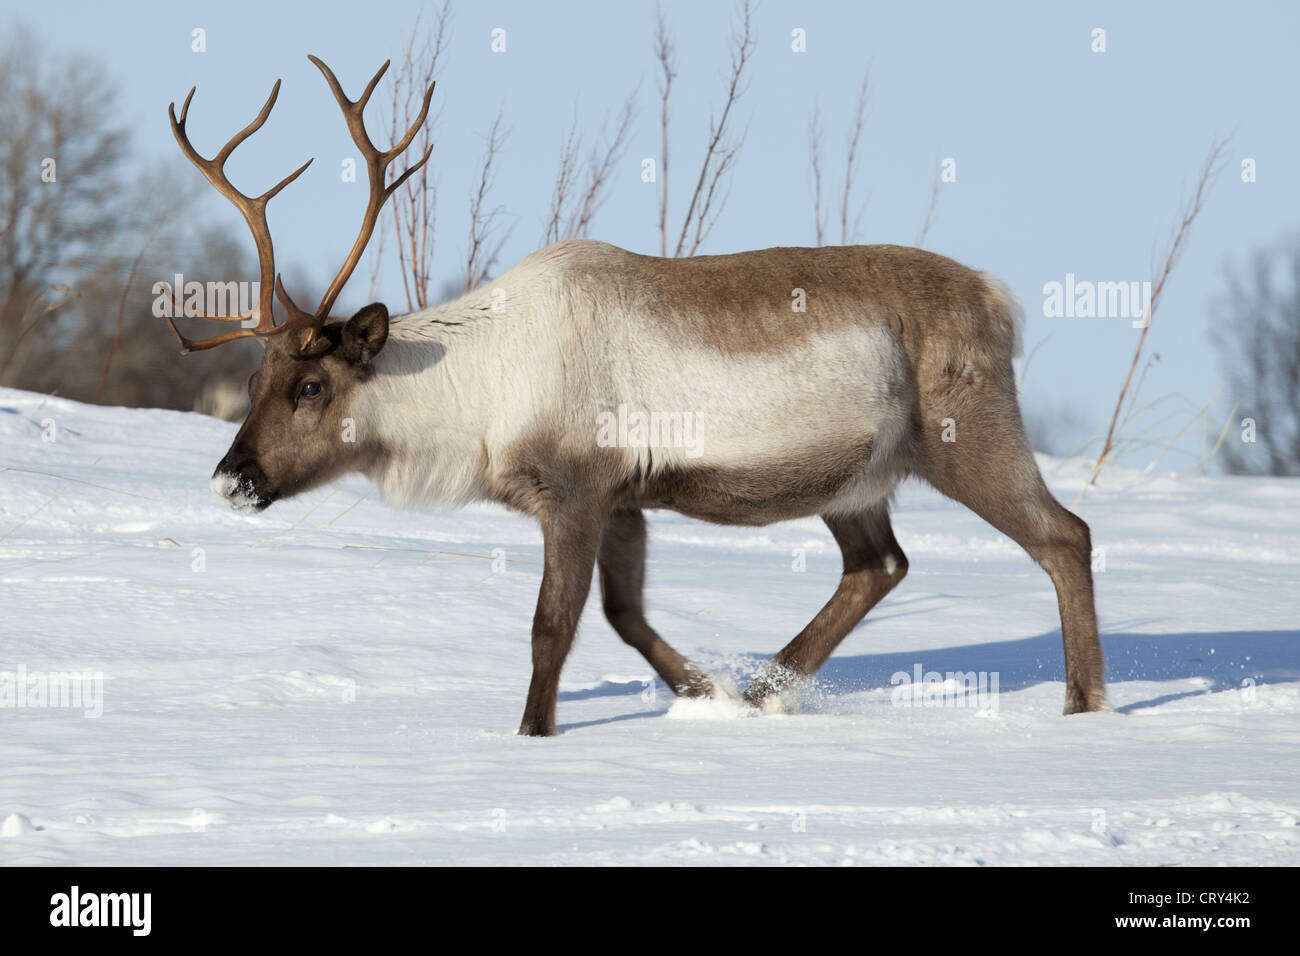 Reindeer roaming in the snow in arctic landscape at Kvaløysletta, Kvaloya Island, Tromso in Arctic Circle Northern Norway Stock Photo